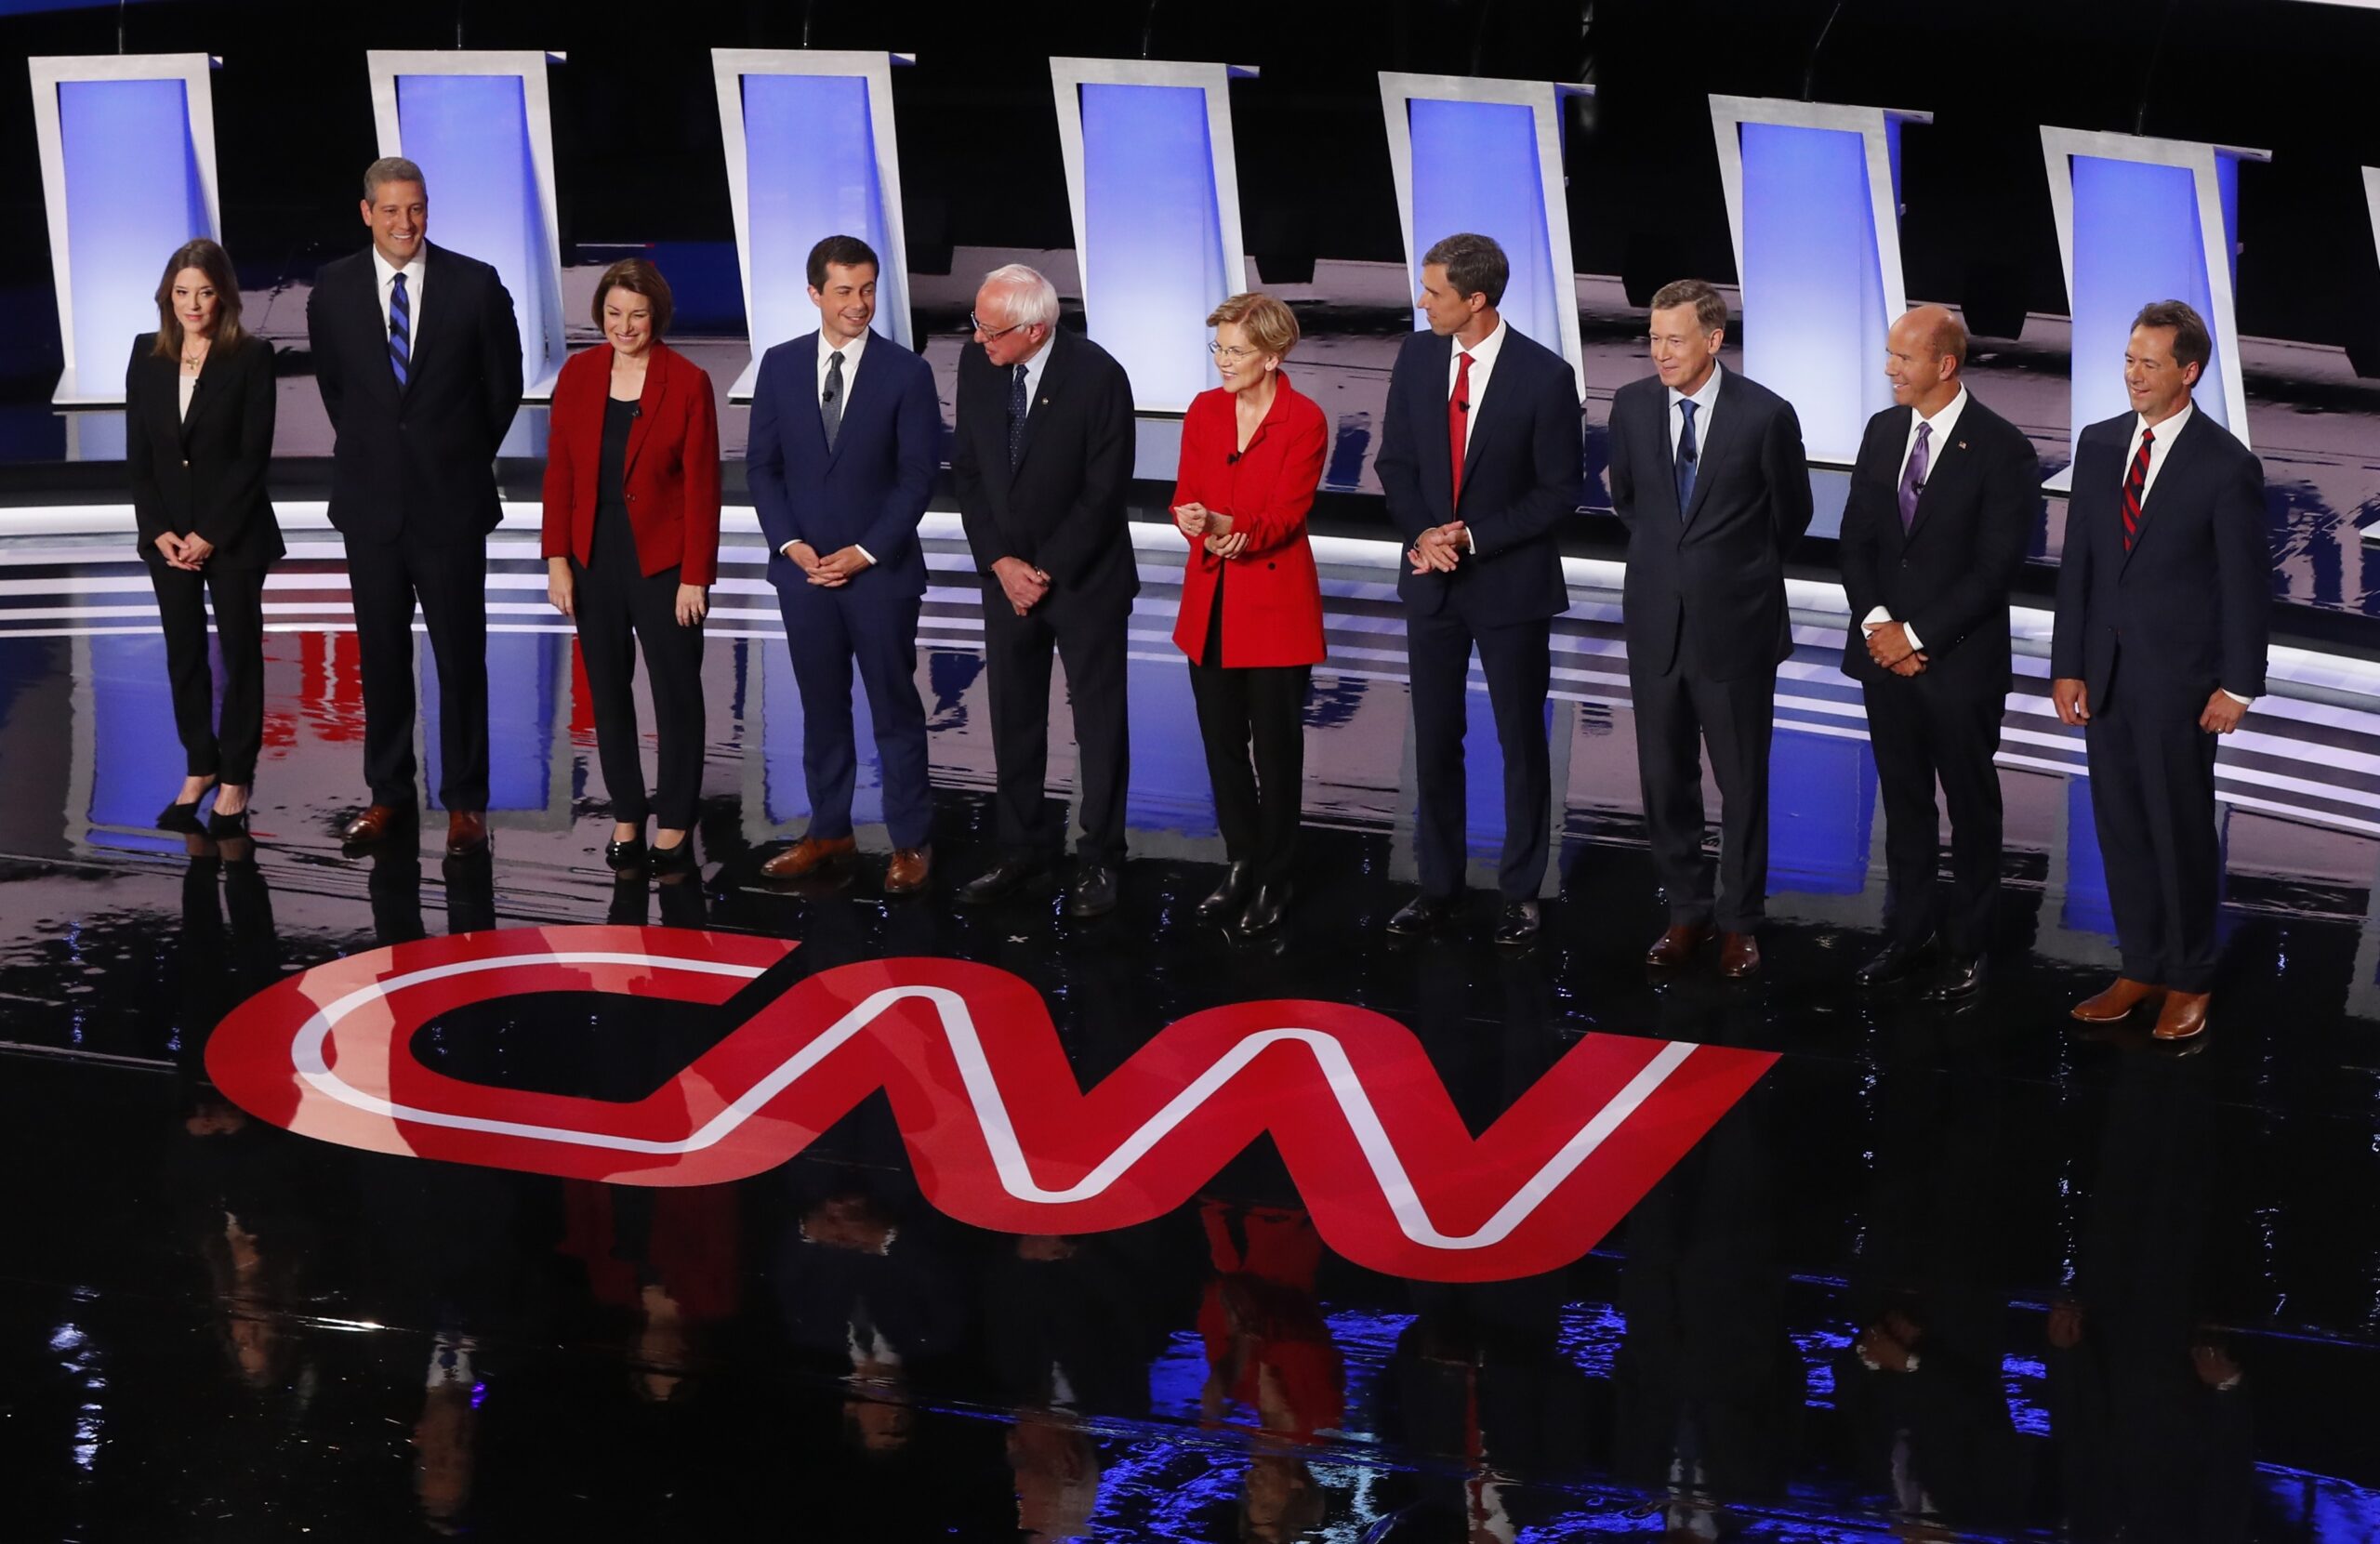 Ten candidates stand on a stage for the first of two Democratic presidential primary debates